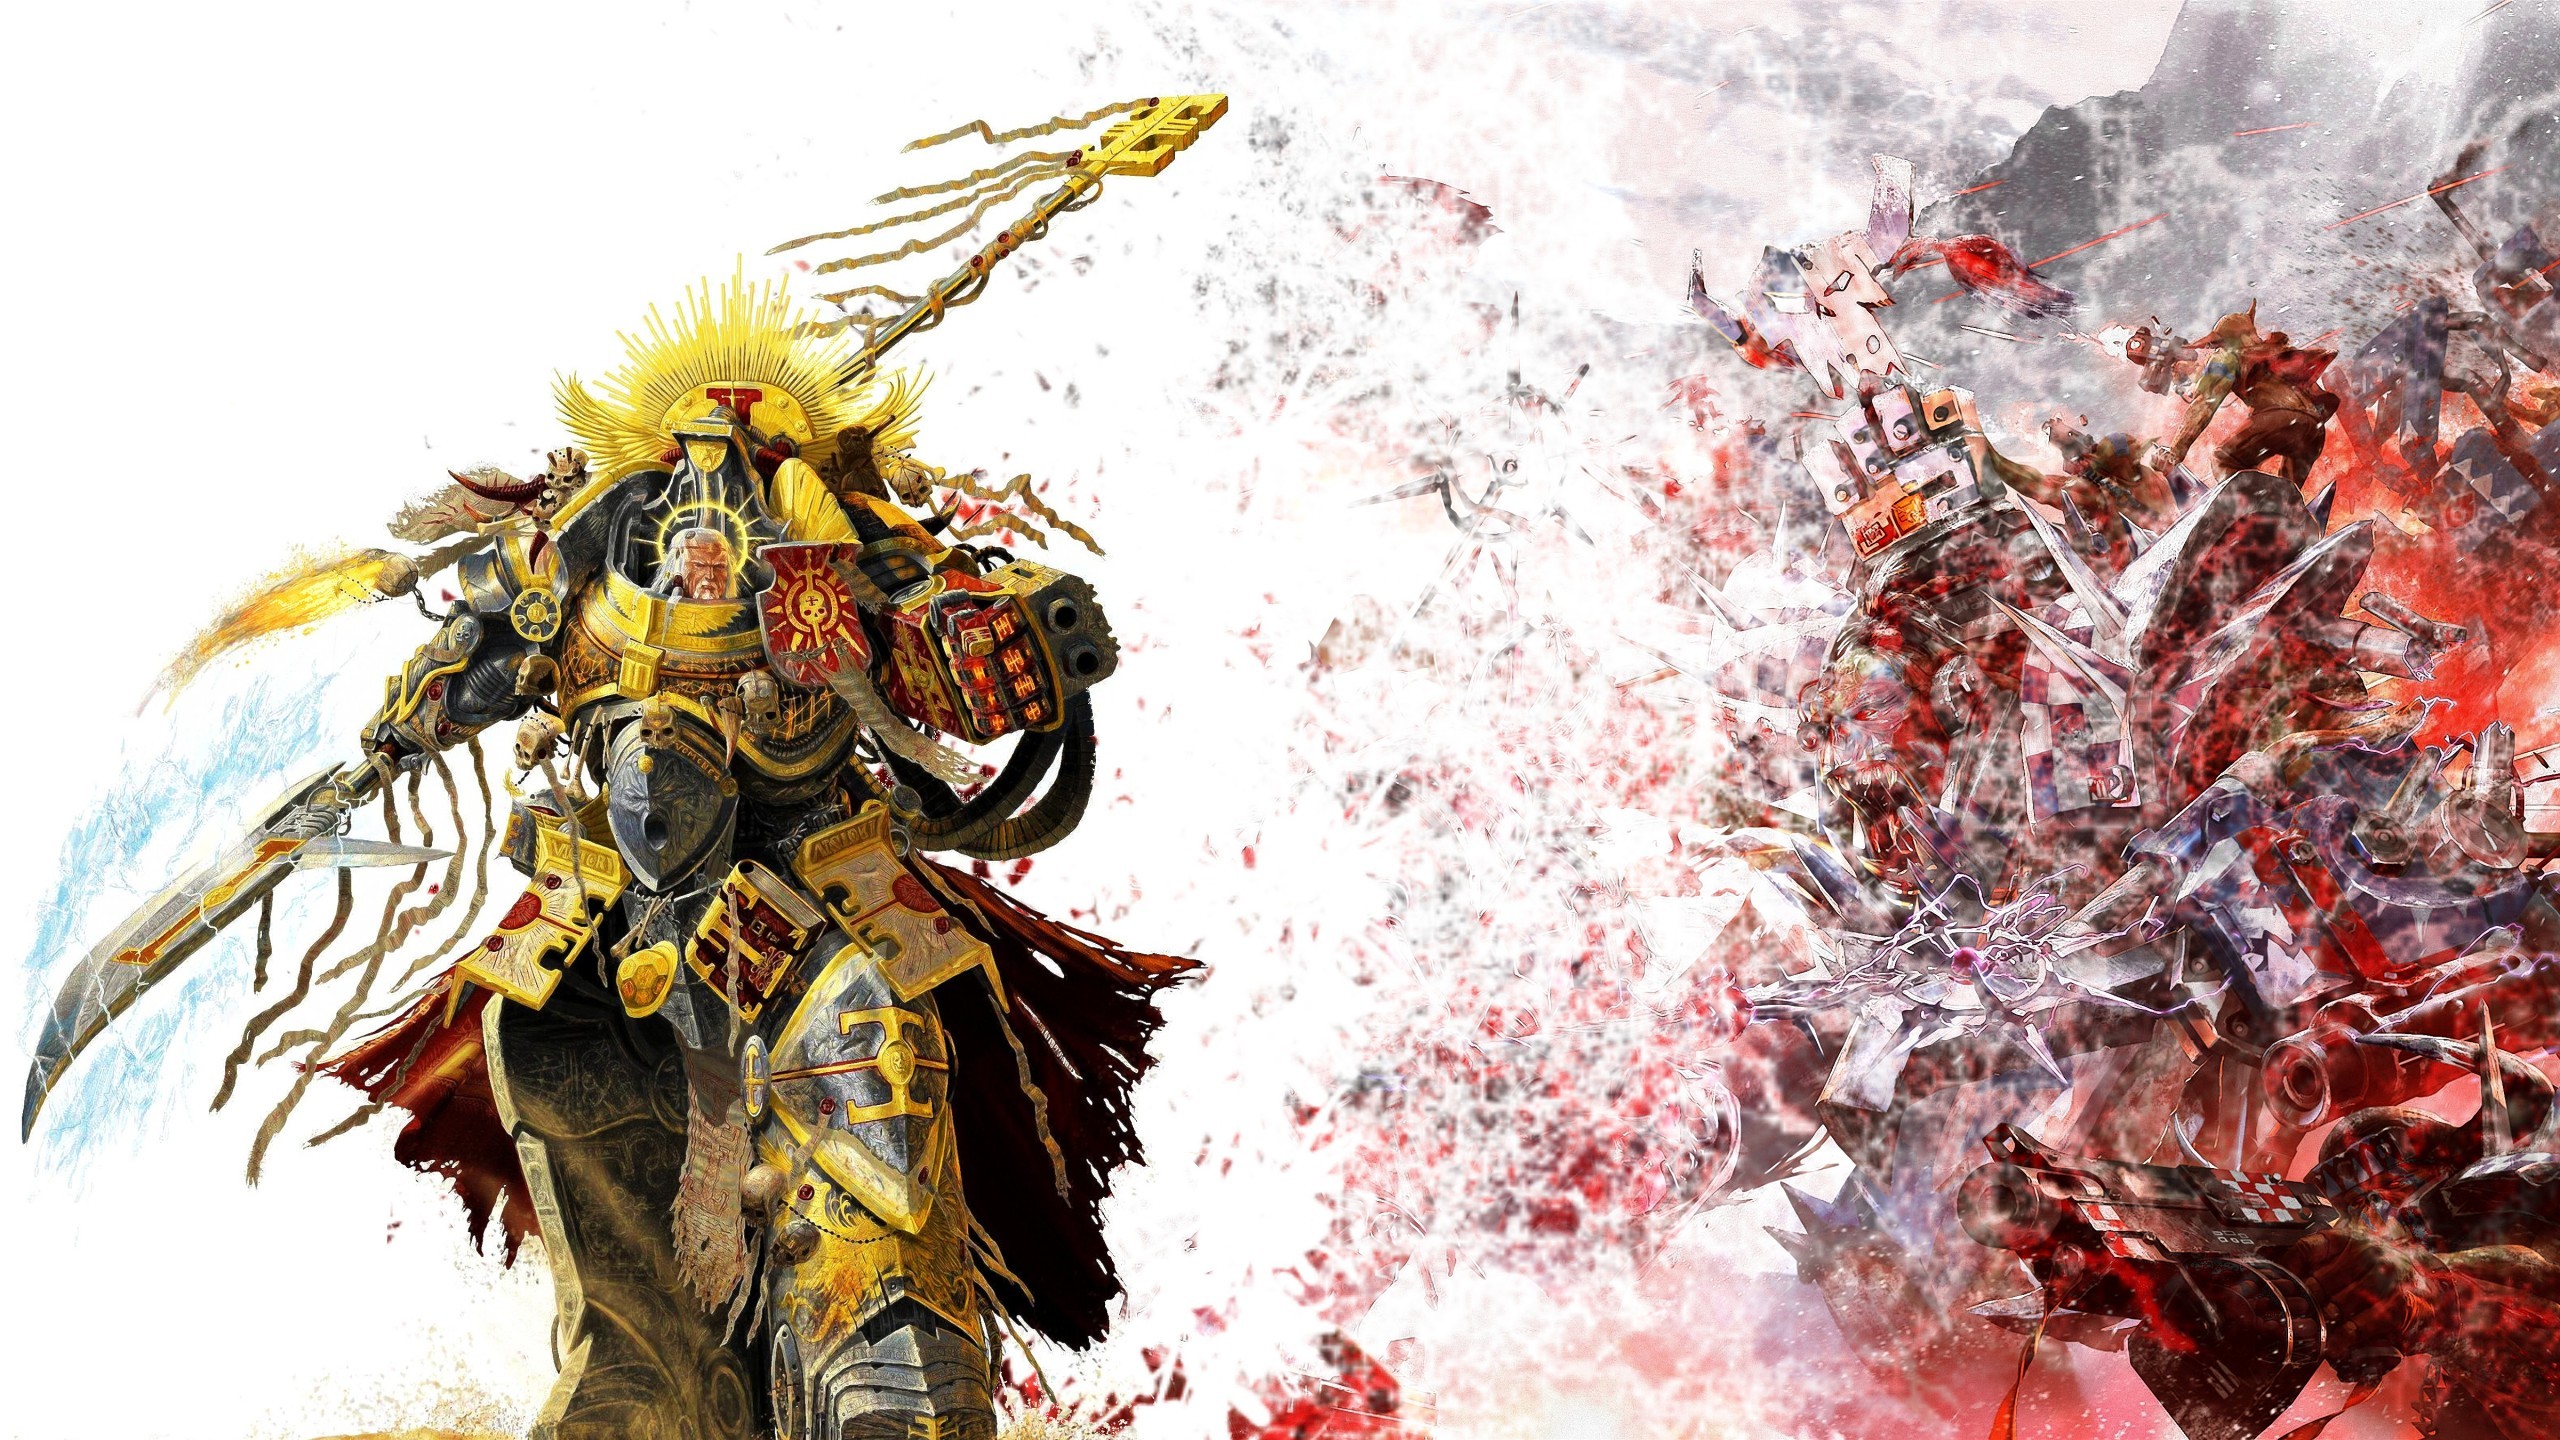 2560x1440 ... Grey Knight and Ork vwarhammer 40k wallpaper by Carionto